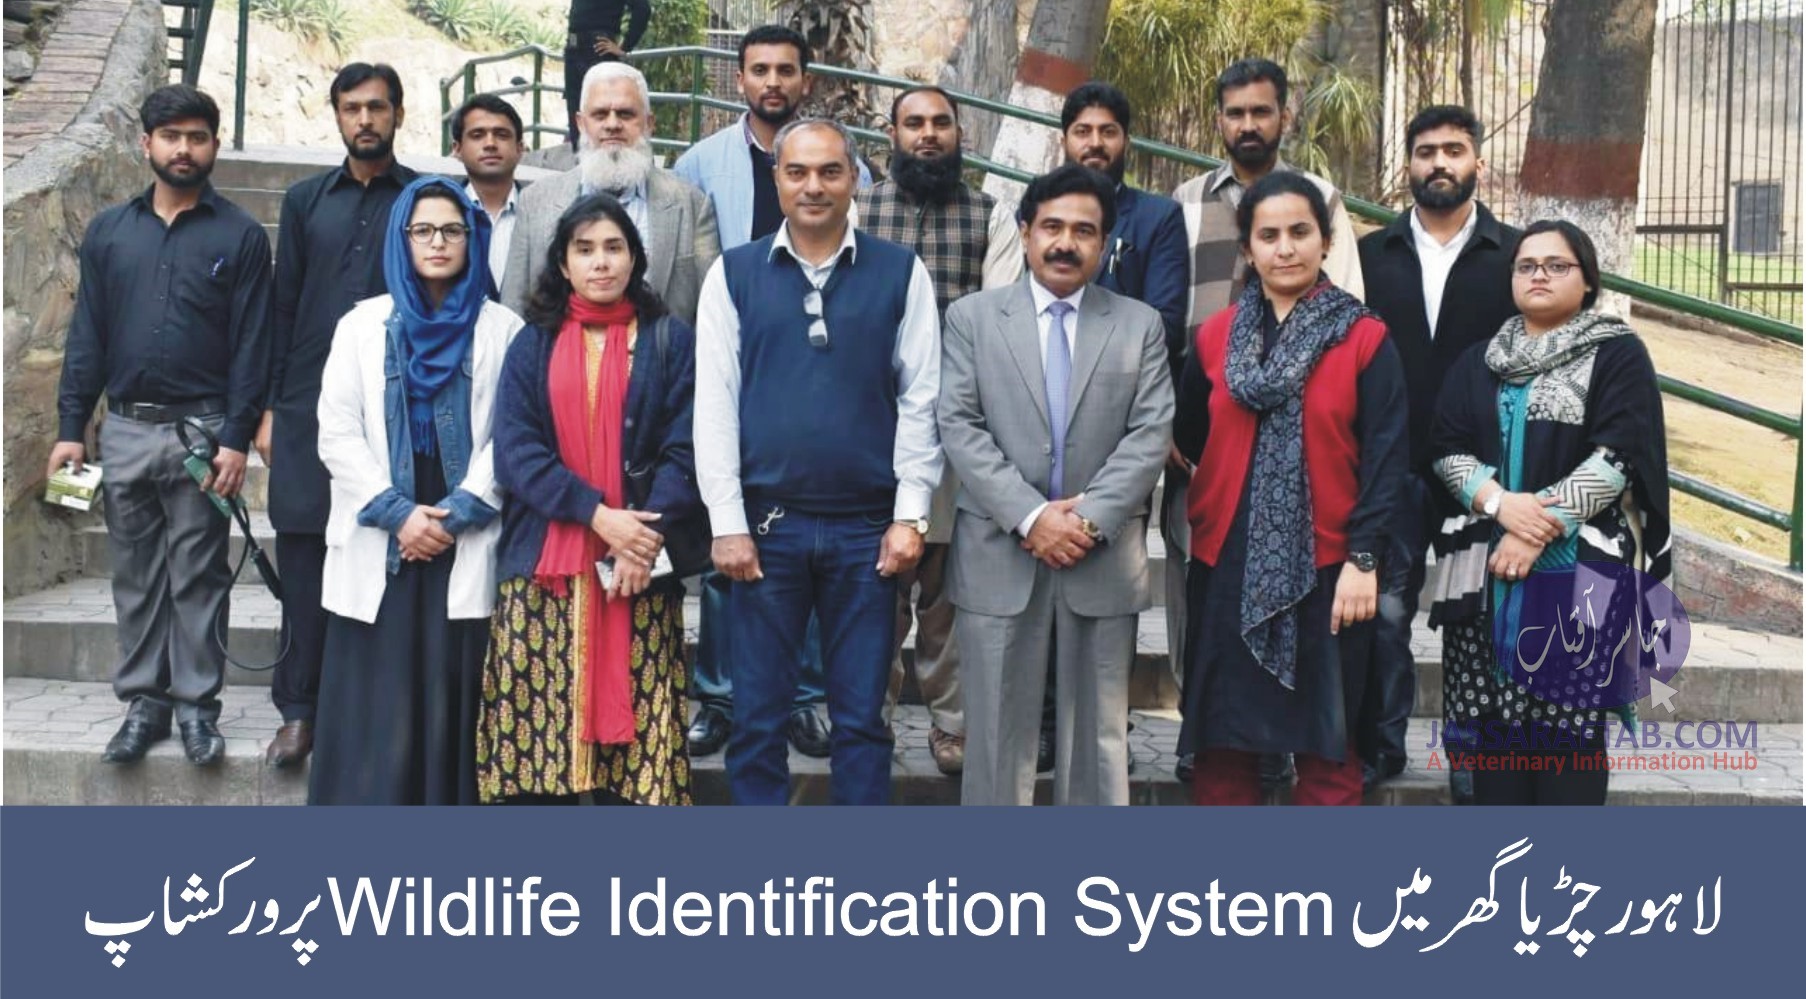 Training workshop on Wildlife Identification System for Captive Species and Micro Chipping